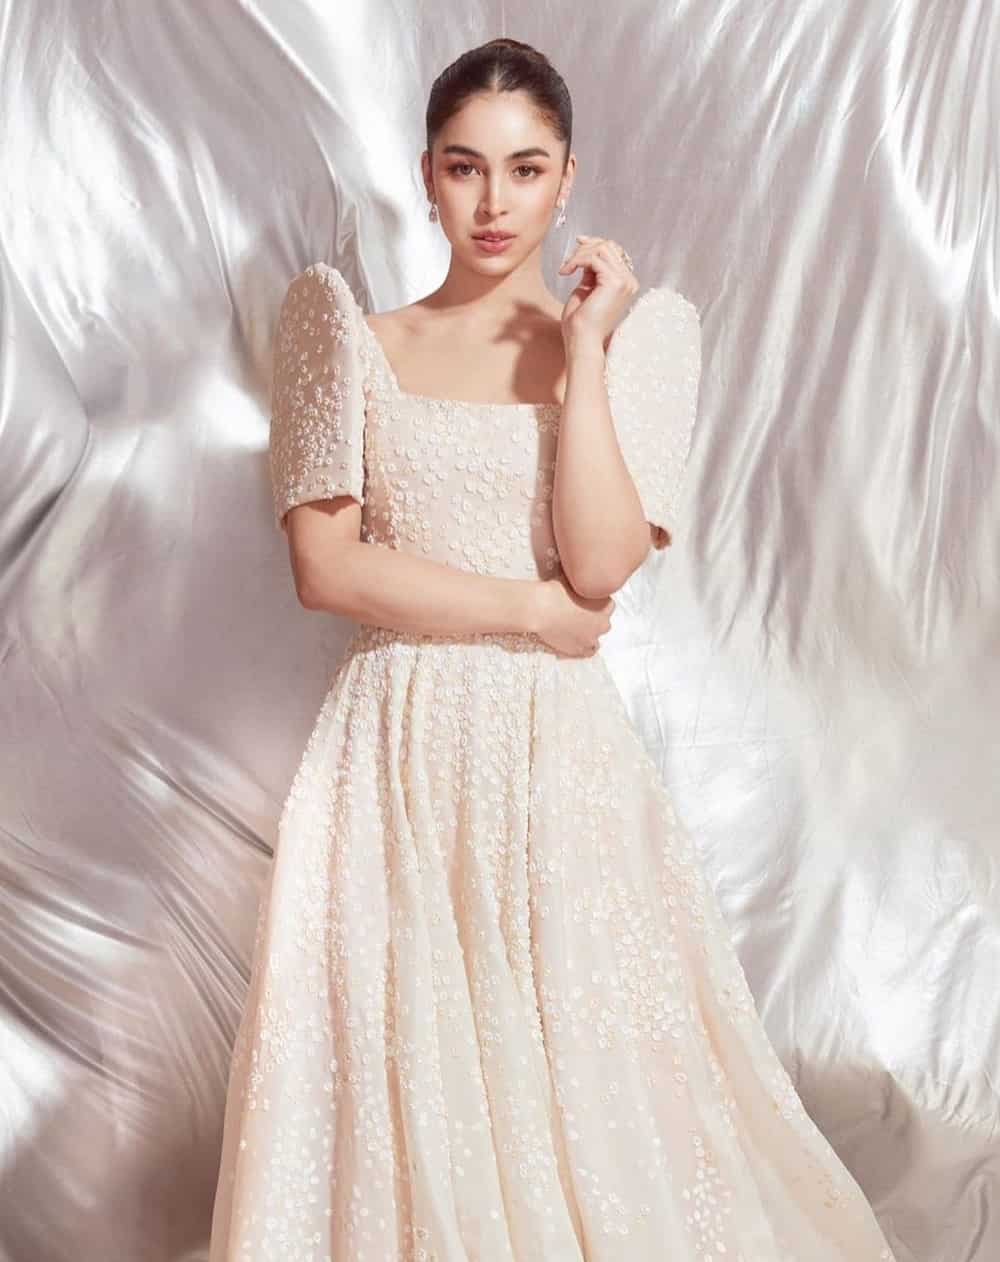 Julia barretto bio: age, height, siblings, what is happening in her love  life?